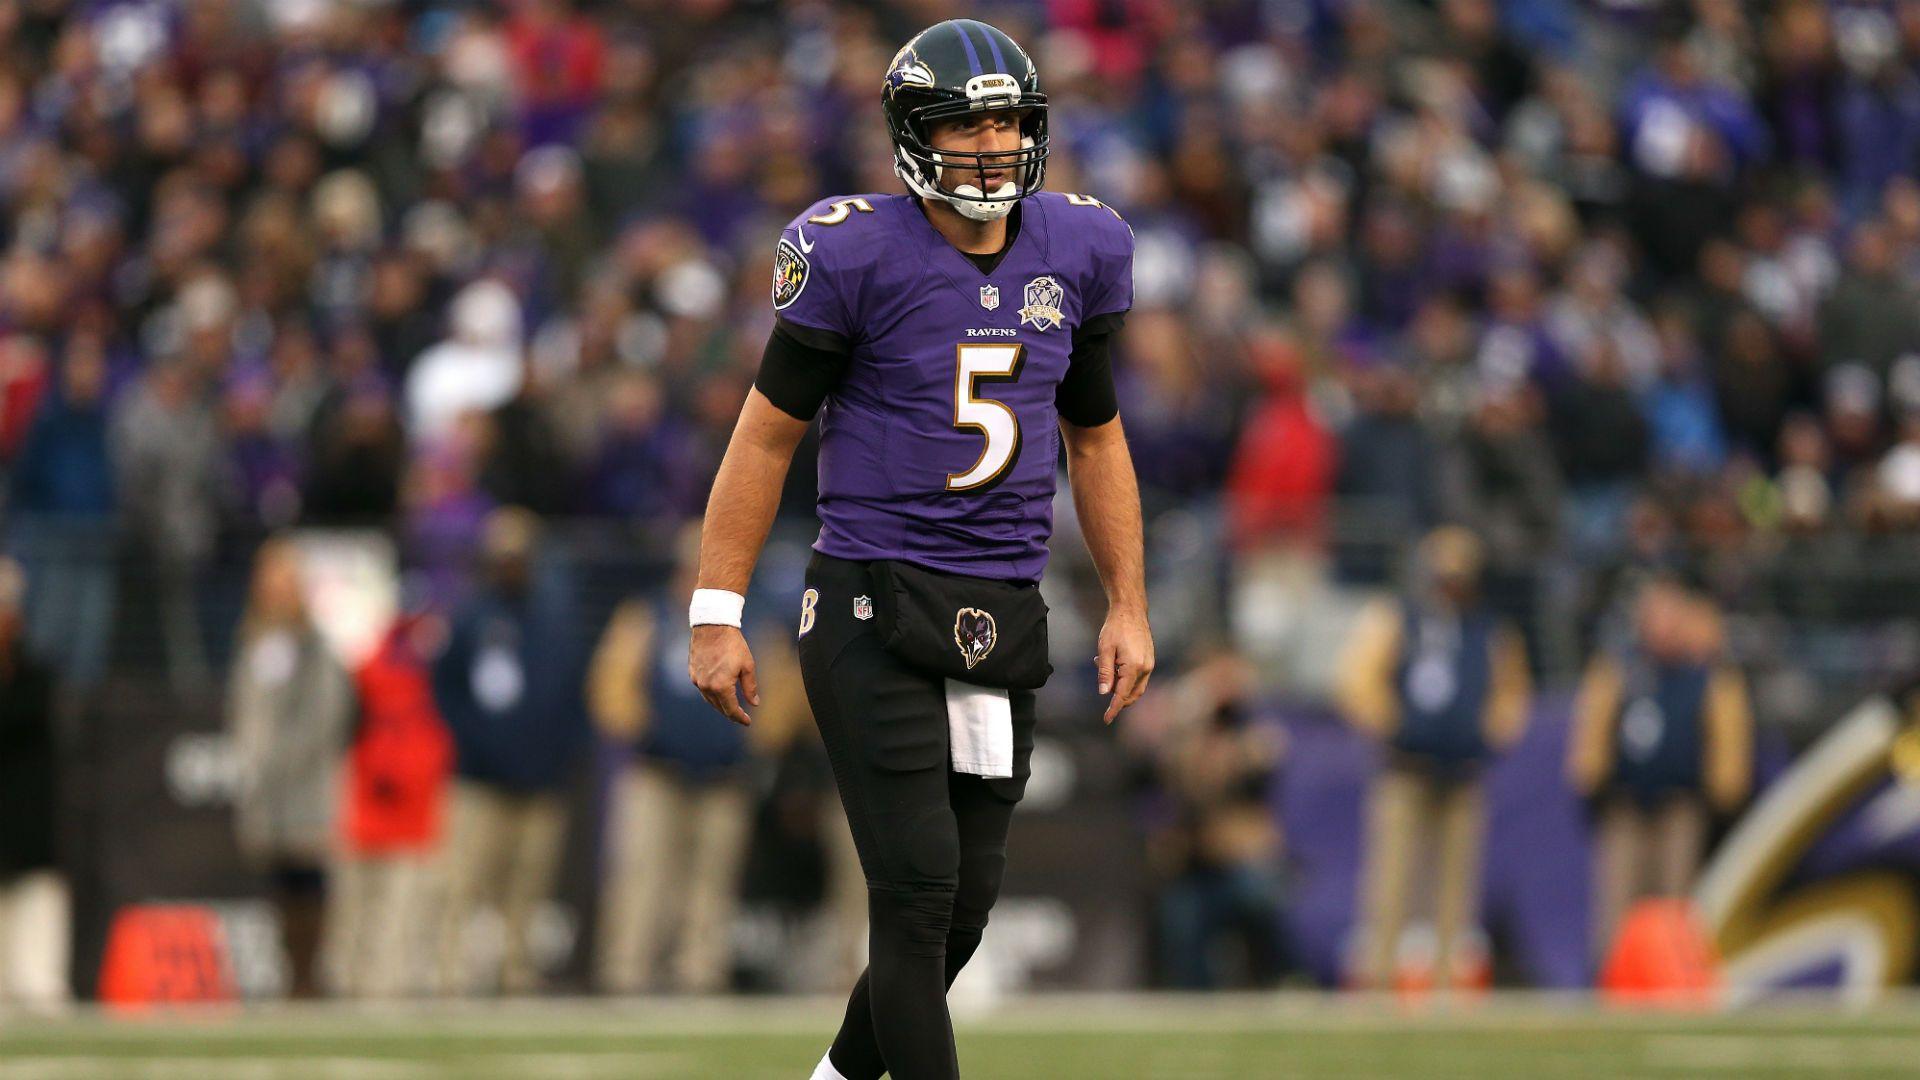 Joe Flacco is back, but no rush for him and other hurting Ravens